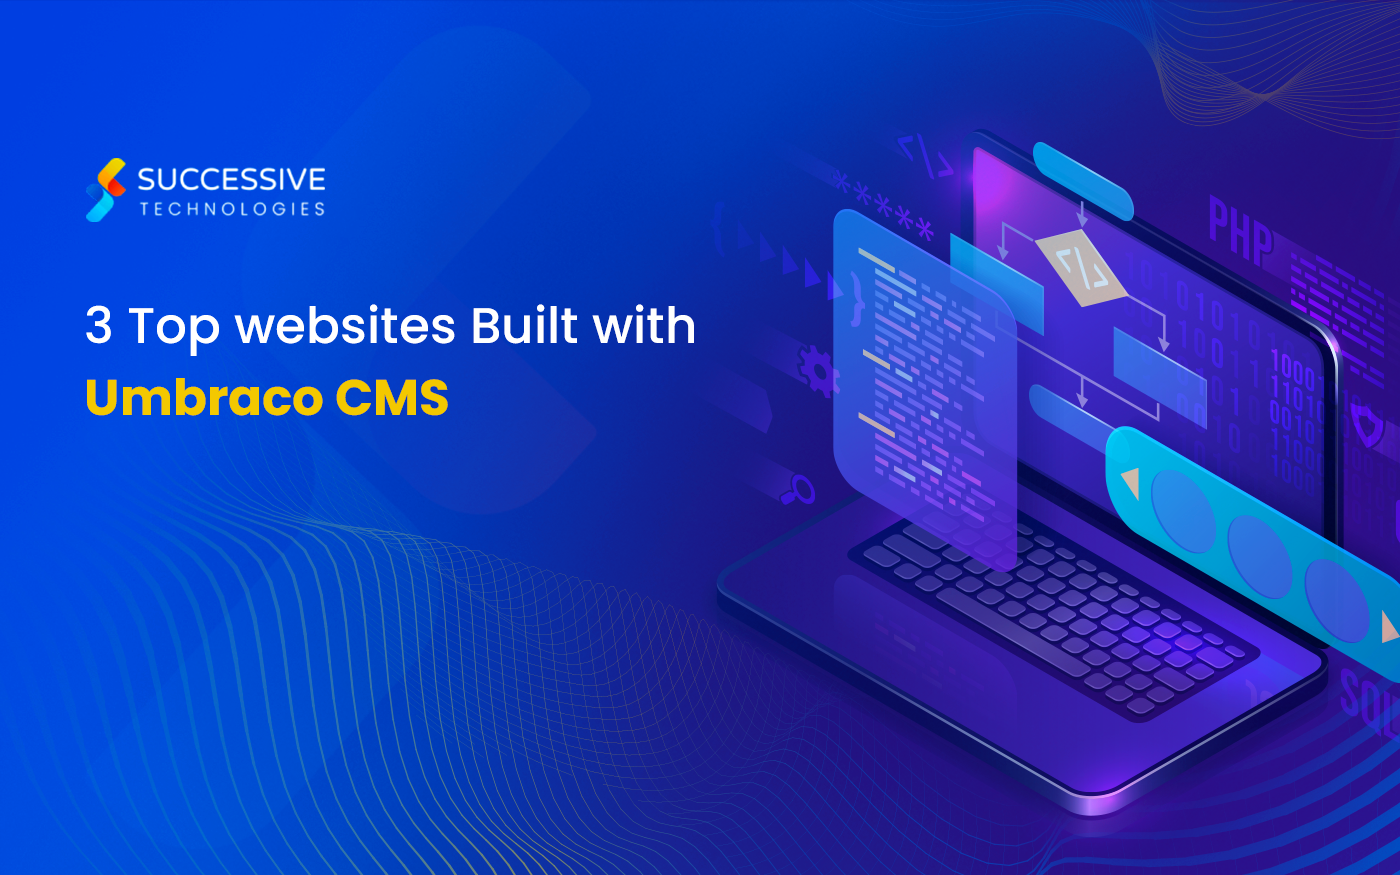 3 Top Websites Built with Umbraco CMS